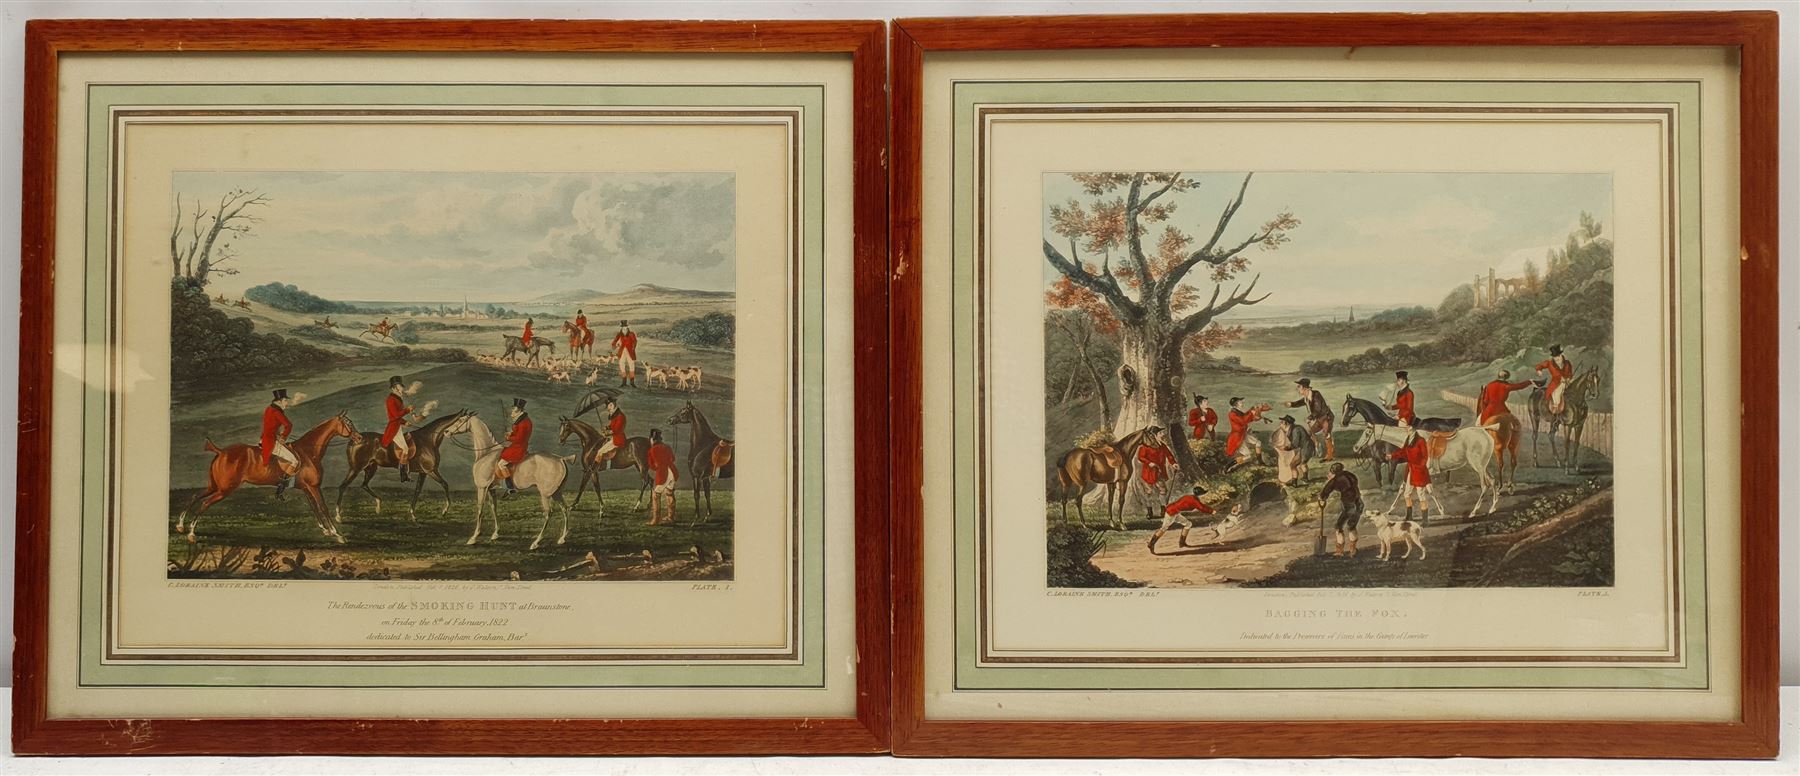 After Charles Loraine Smith (British 1751-1835): 'The Smoking Hunt' and 'Bagging the Fox'